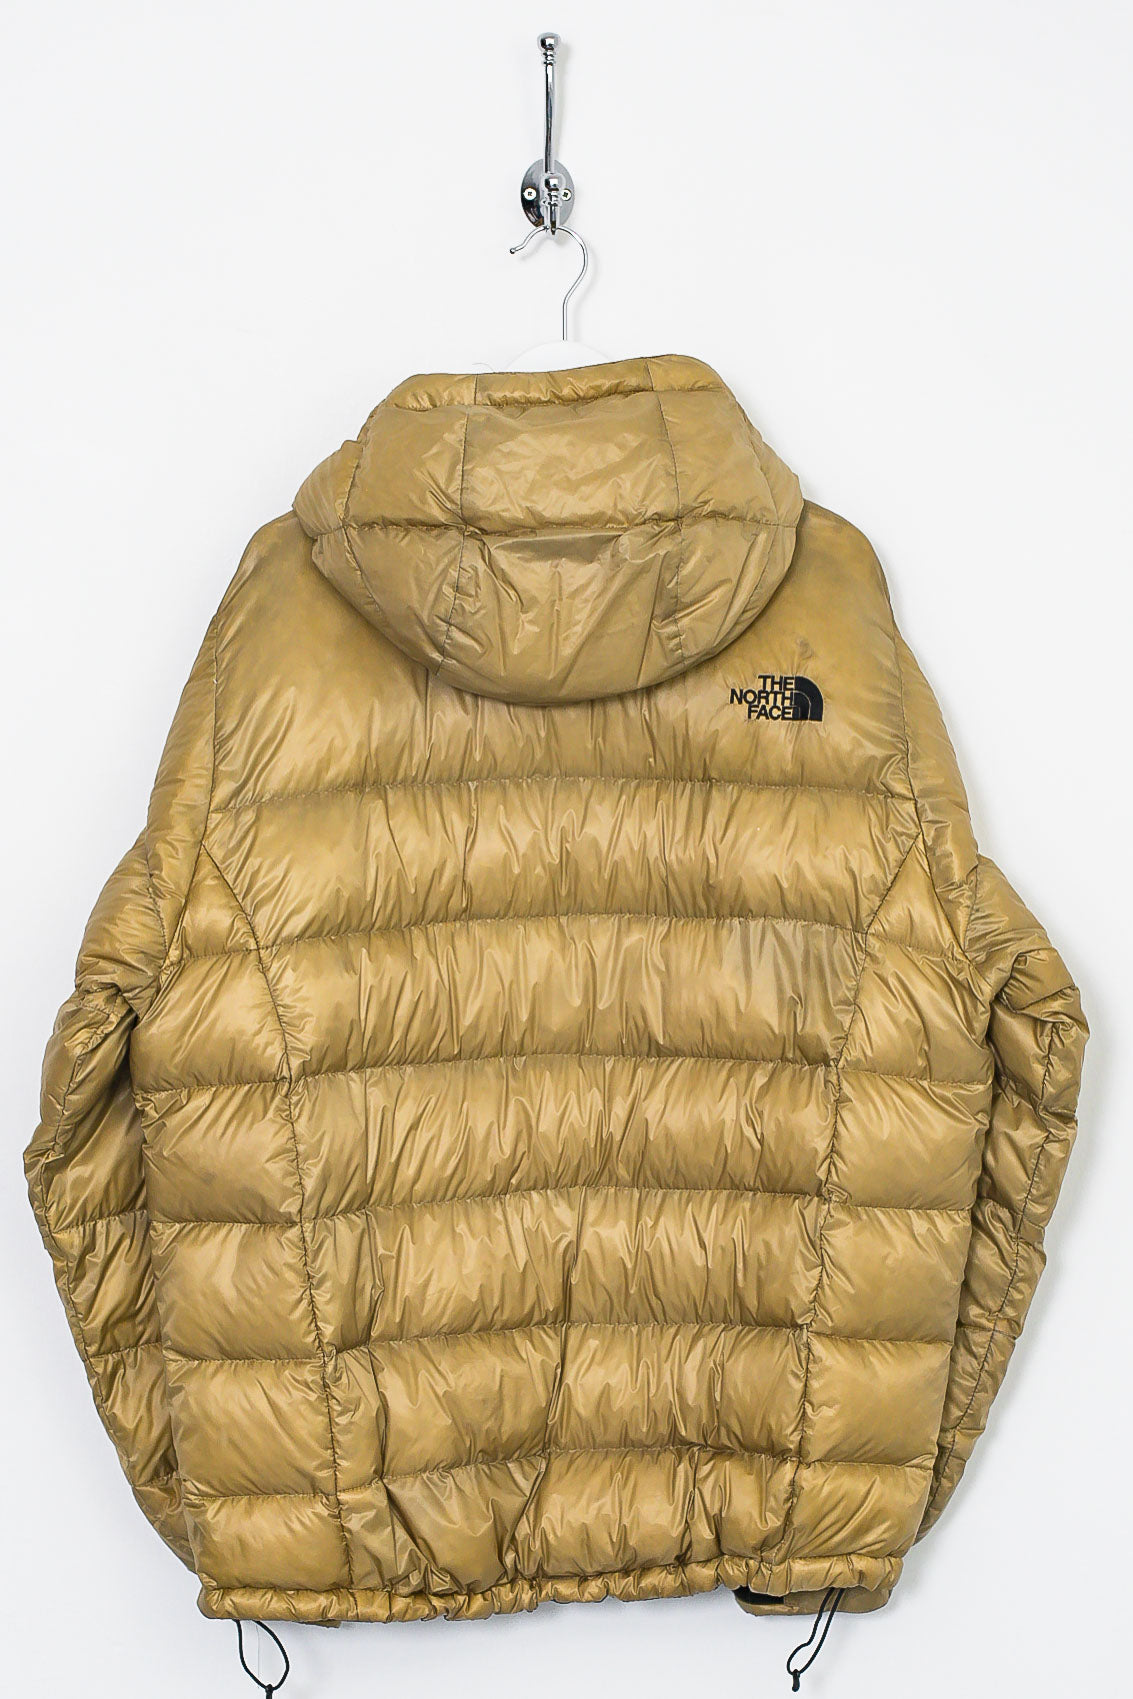 The North Face 700 Fill Puffer Jacket (M)